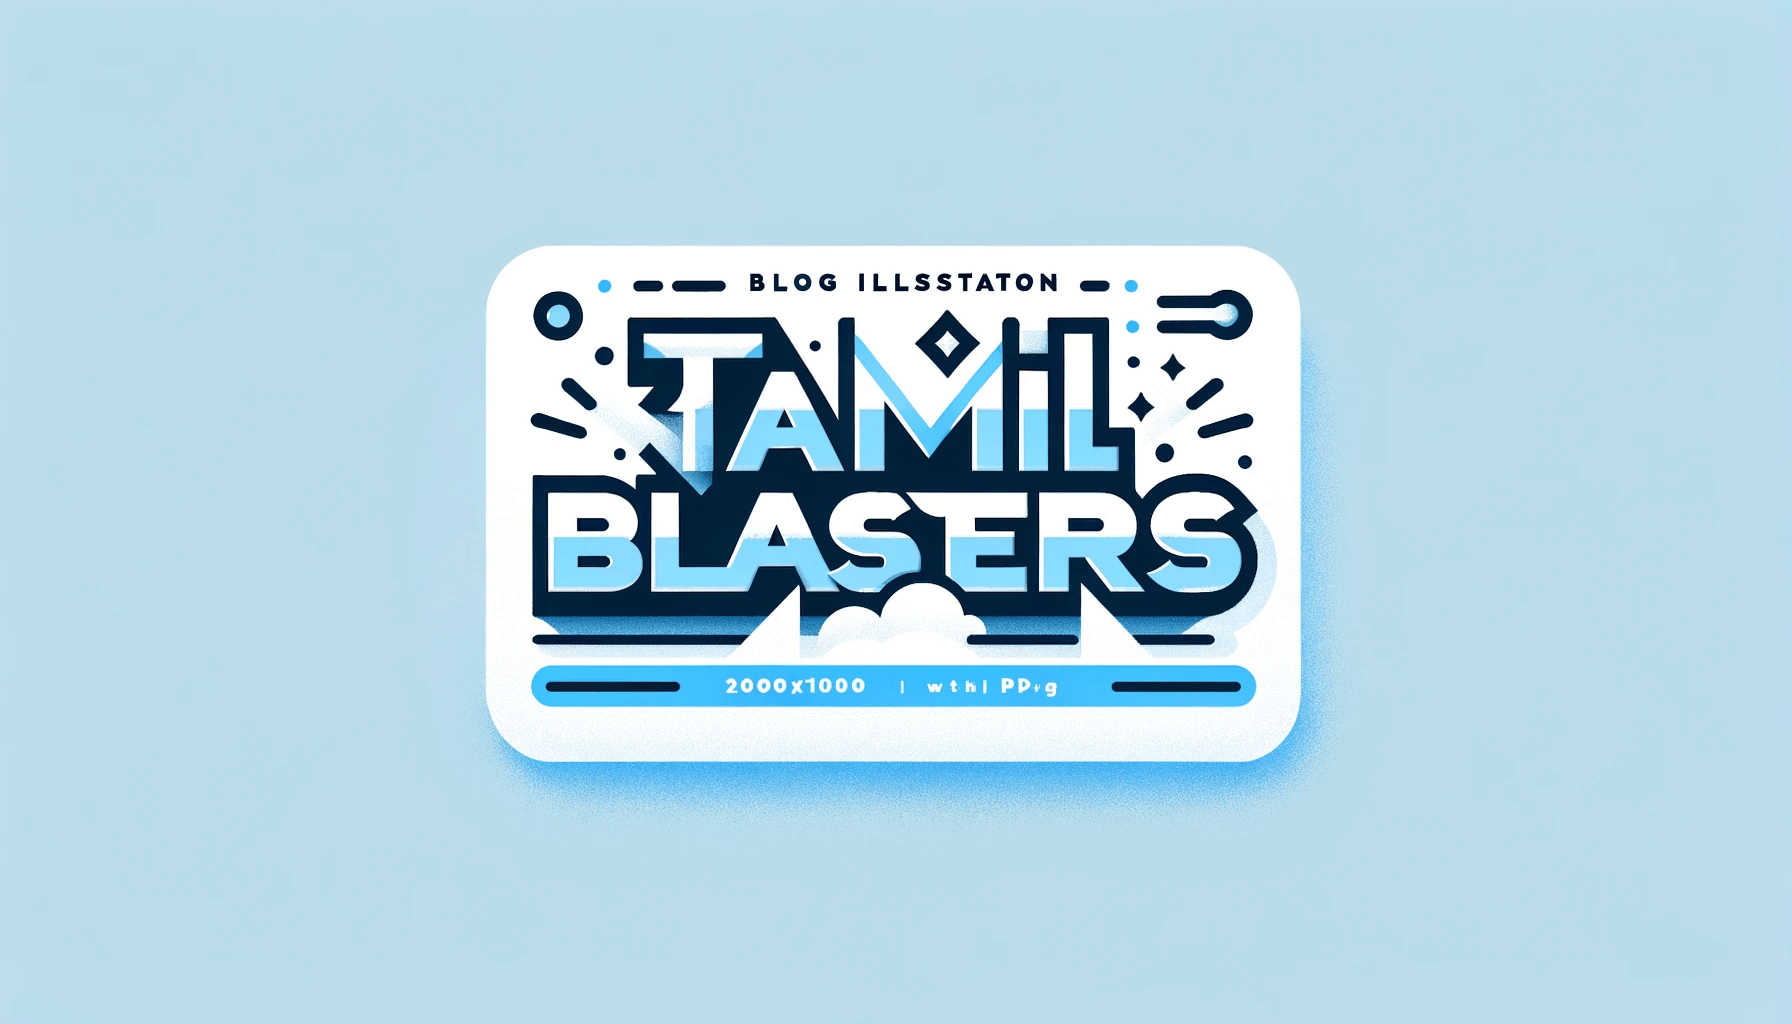 How to Access Tamilblasters Website 